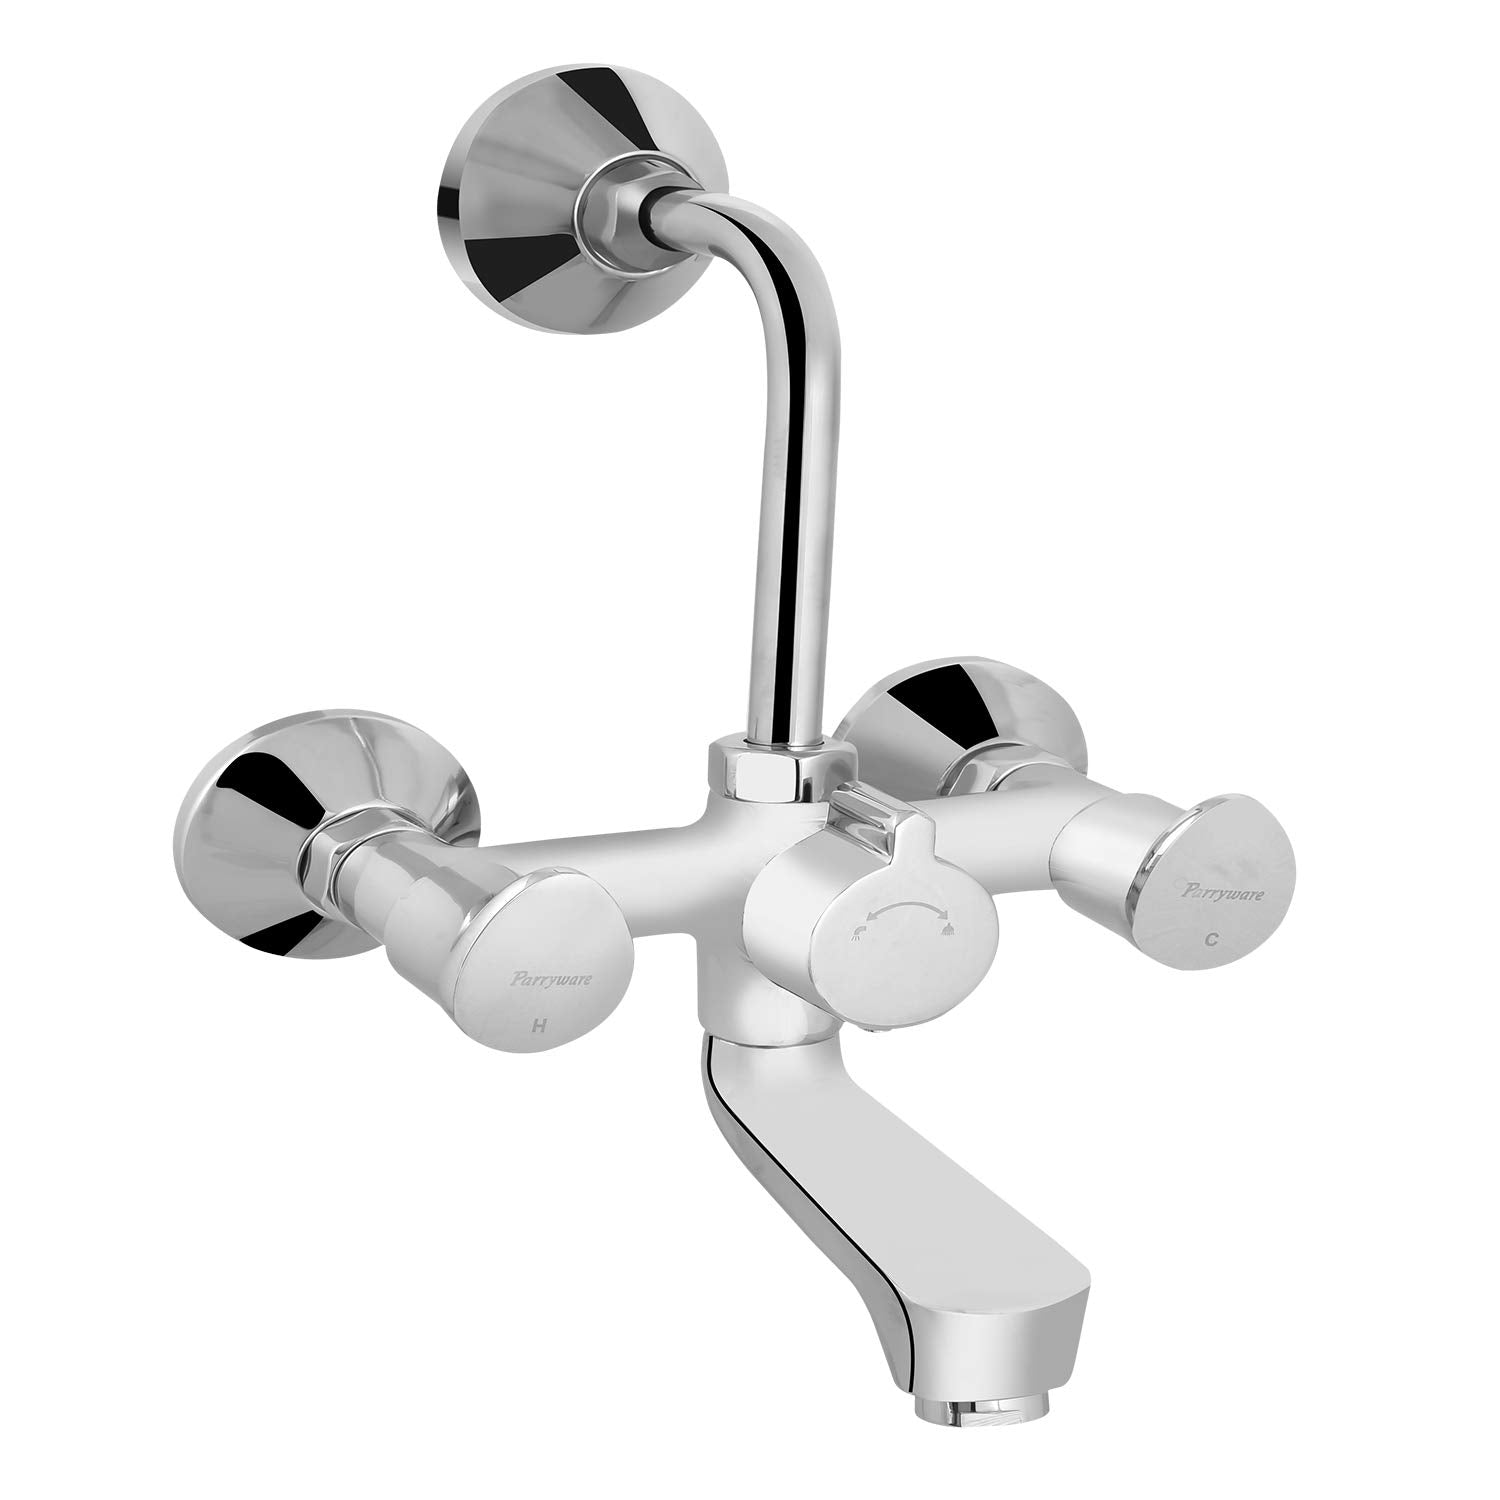 Parryware G4716A1 Droplet Quarter Turn Range Wall Mixer 2-in-1